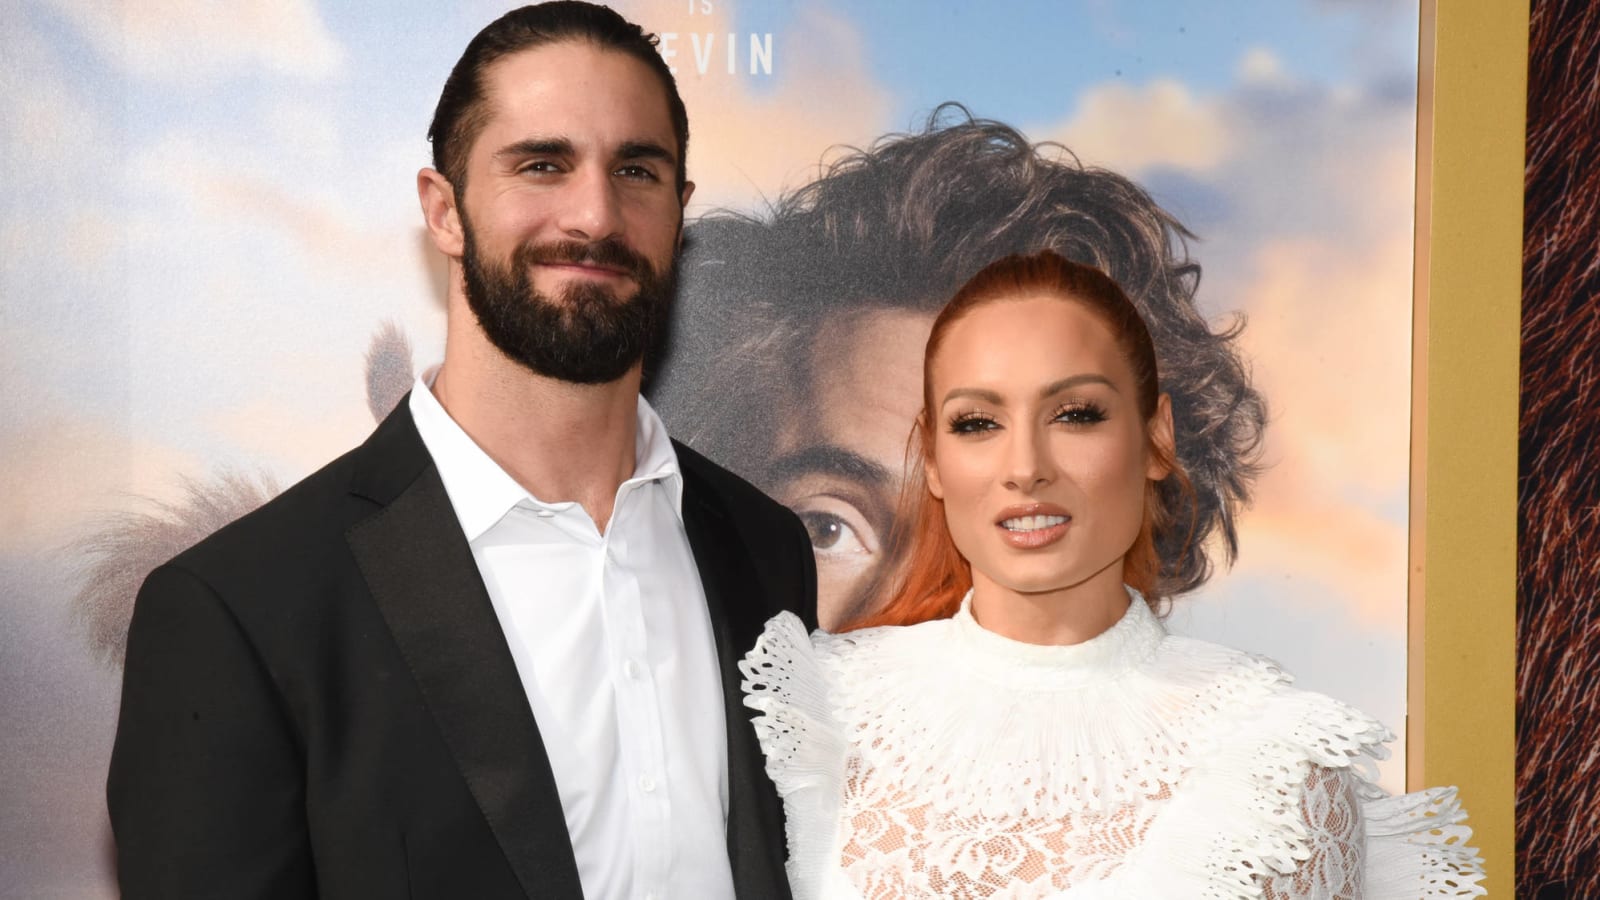 Becky Lynch and Seth Rollins' wedding day picture with their baby